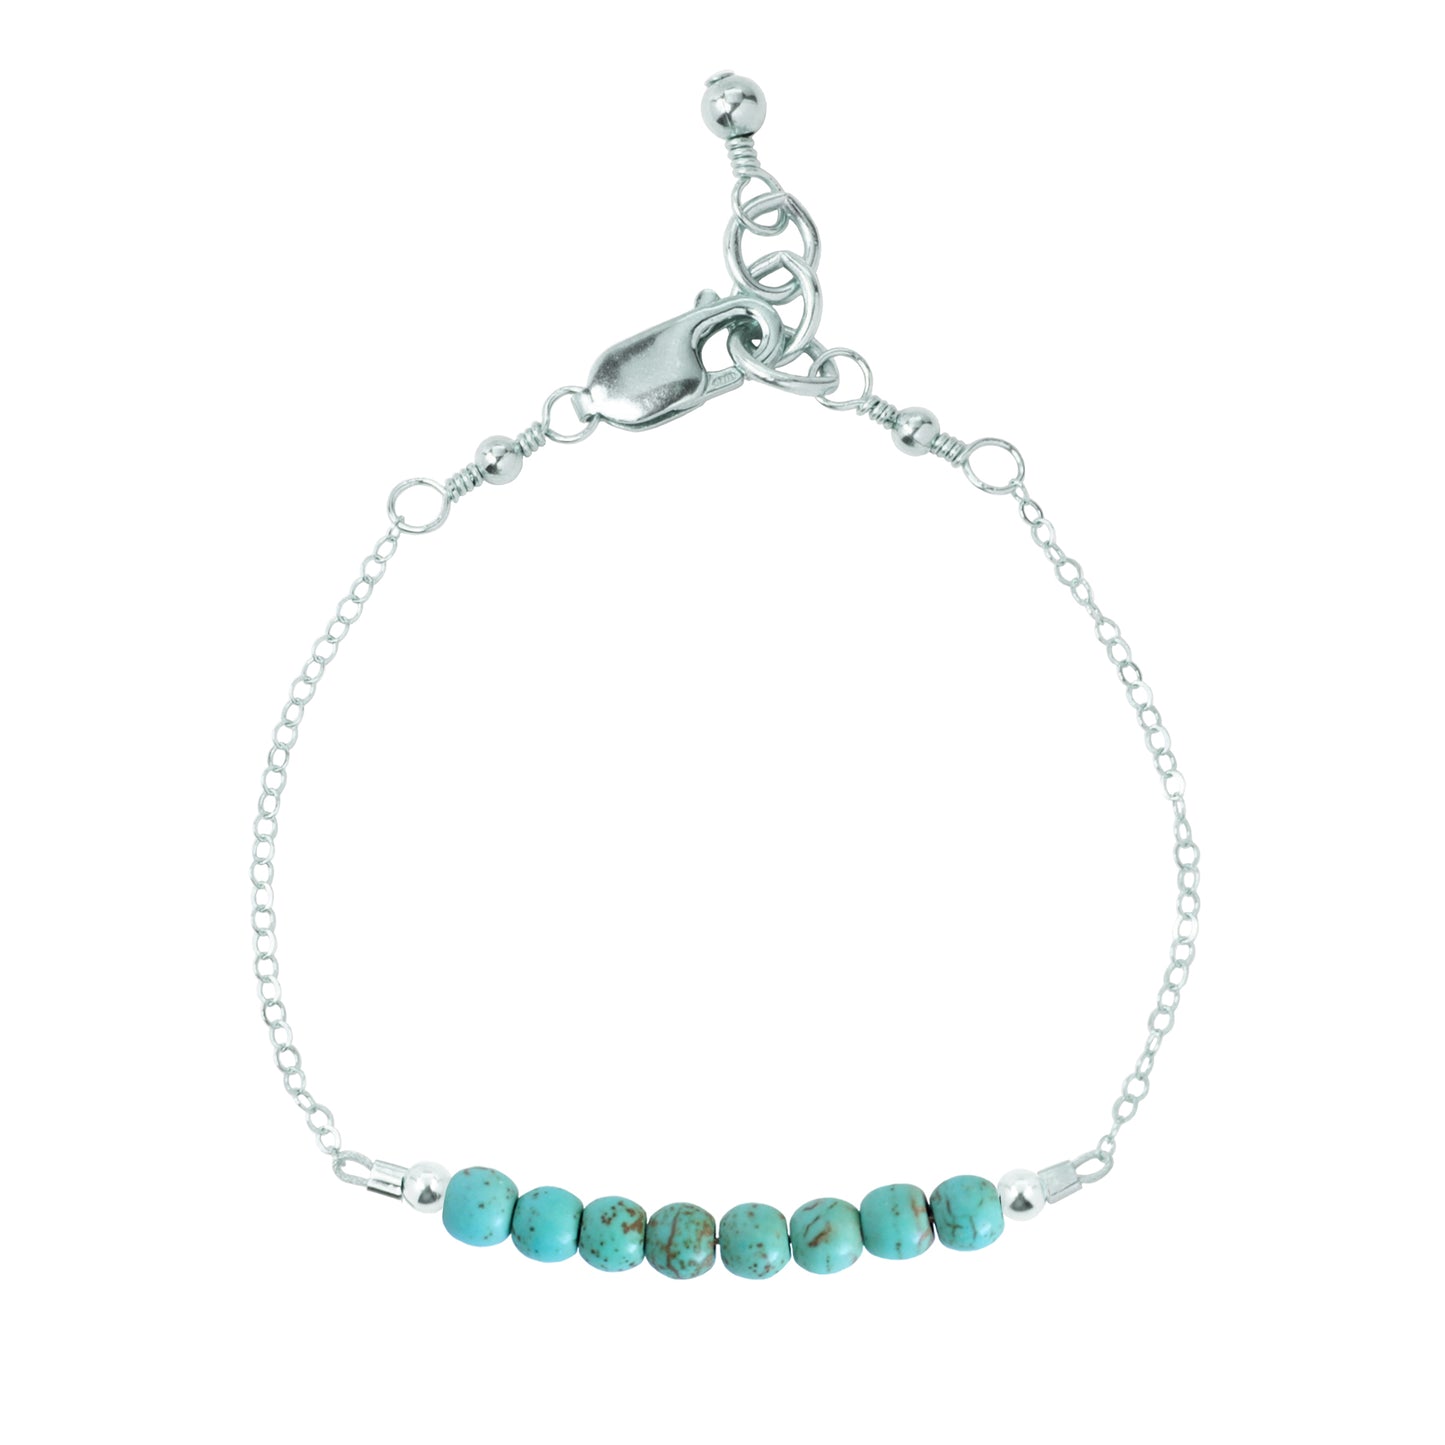 Turquoise Adult Chain Bracelet (4MM beads)